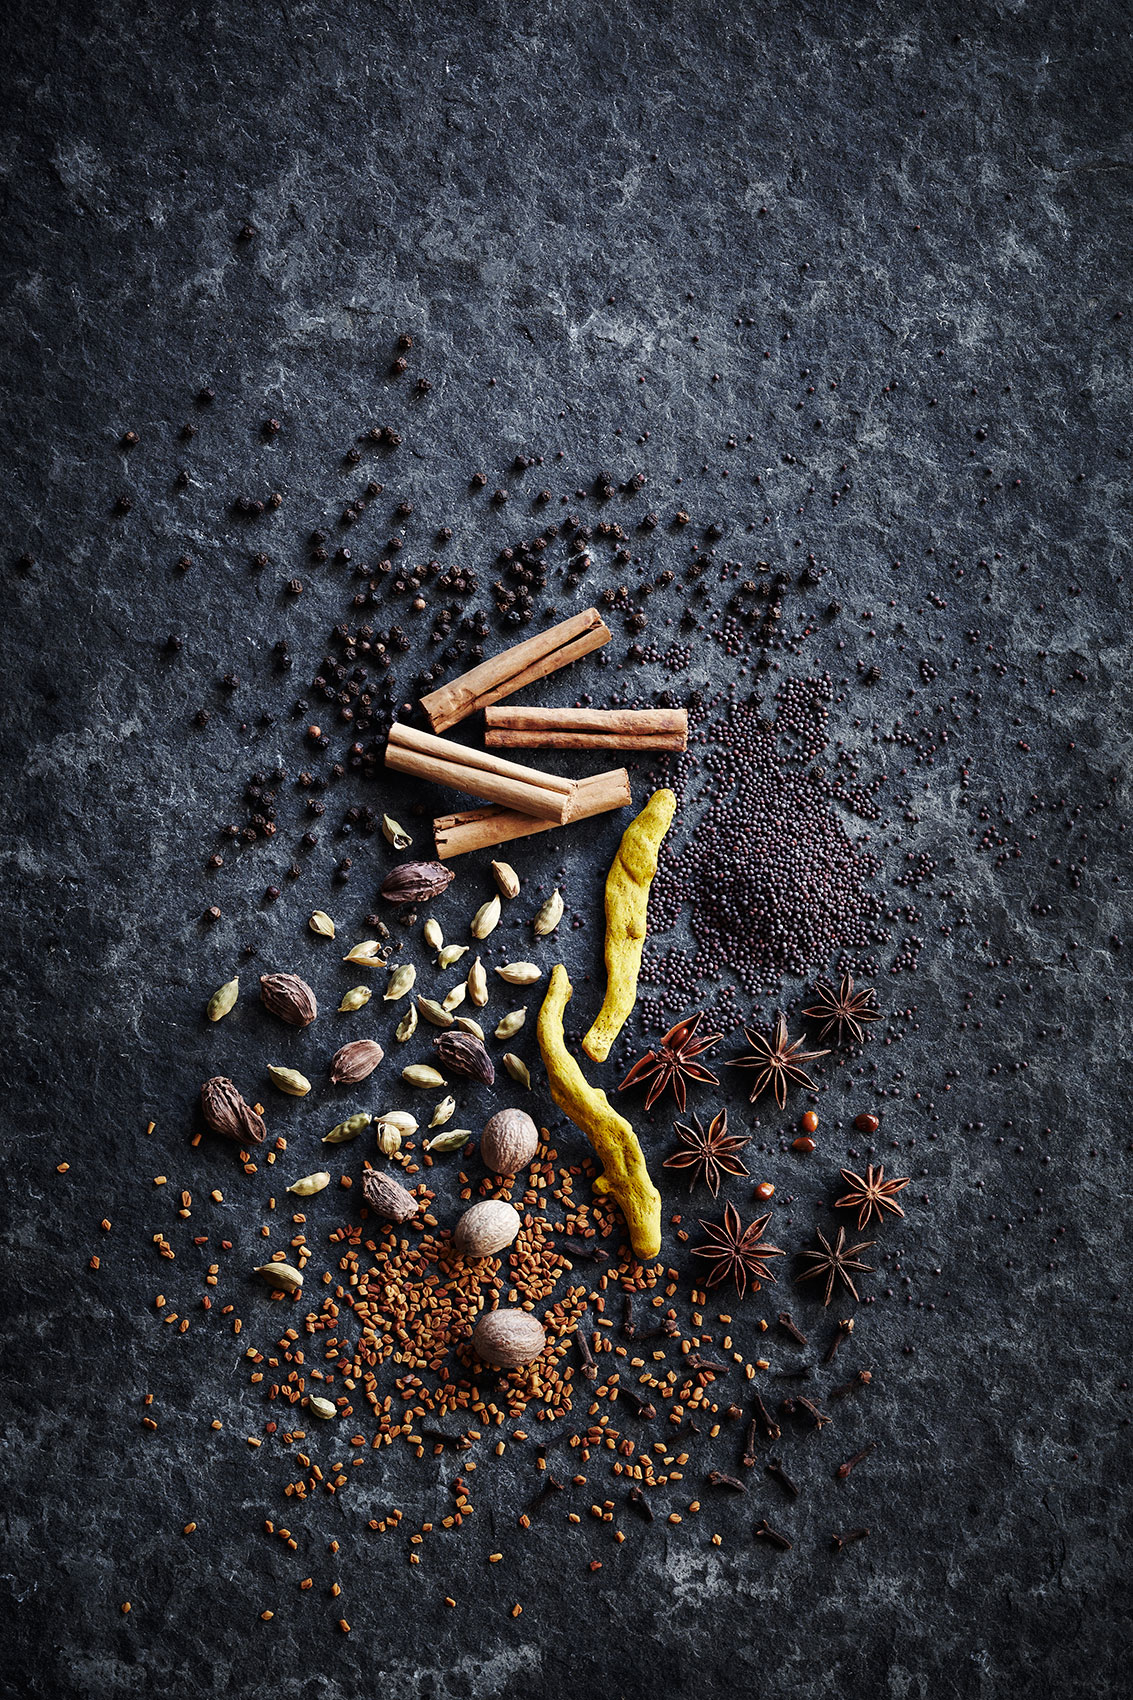 Spice Health Heroes • Mixed Dried Spices on Dark Bench Book Cover Shot  • Cookbook & Editorial Food Photography